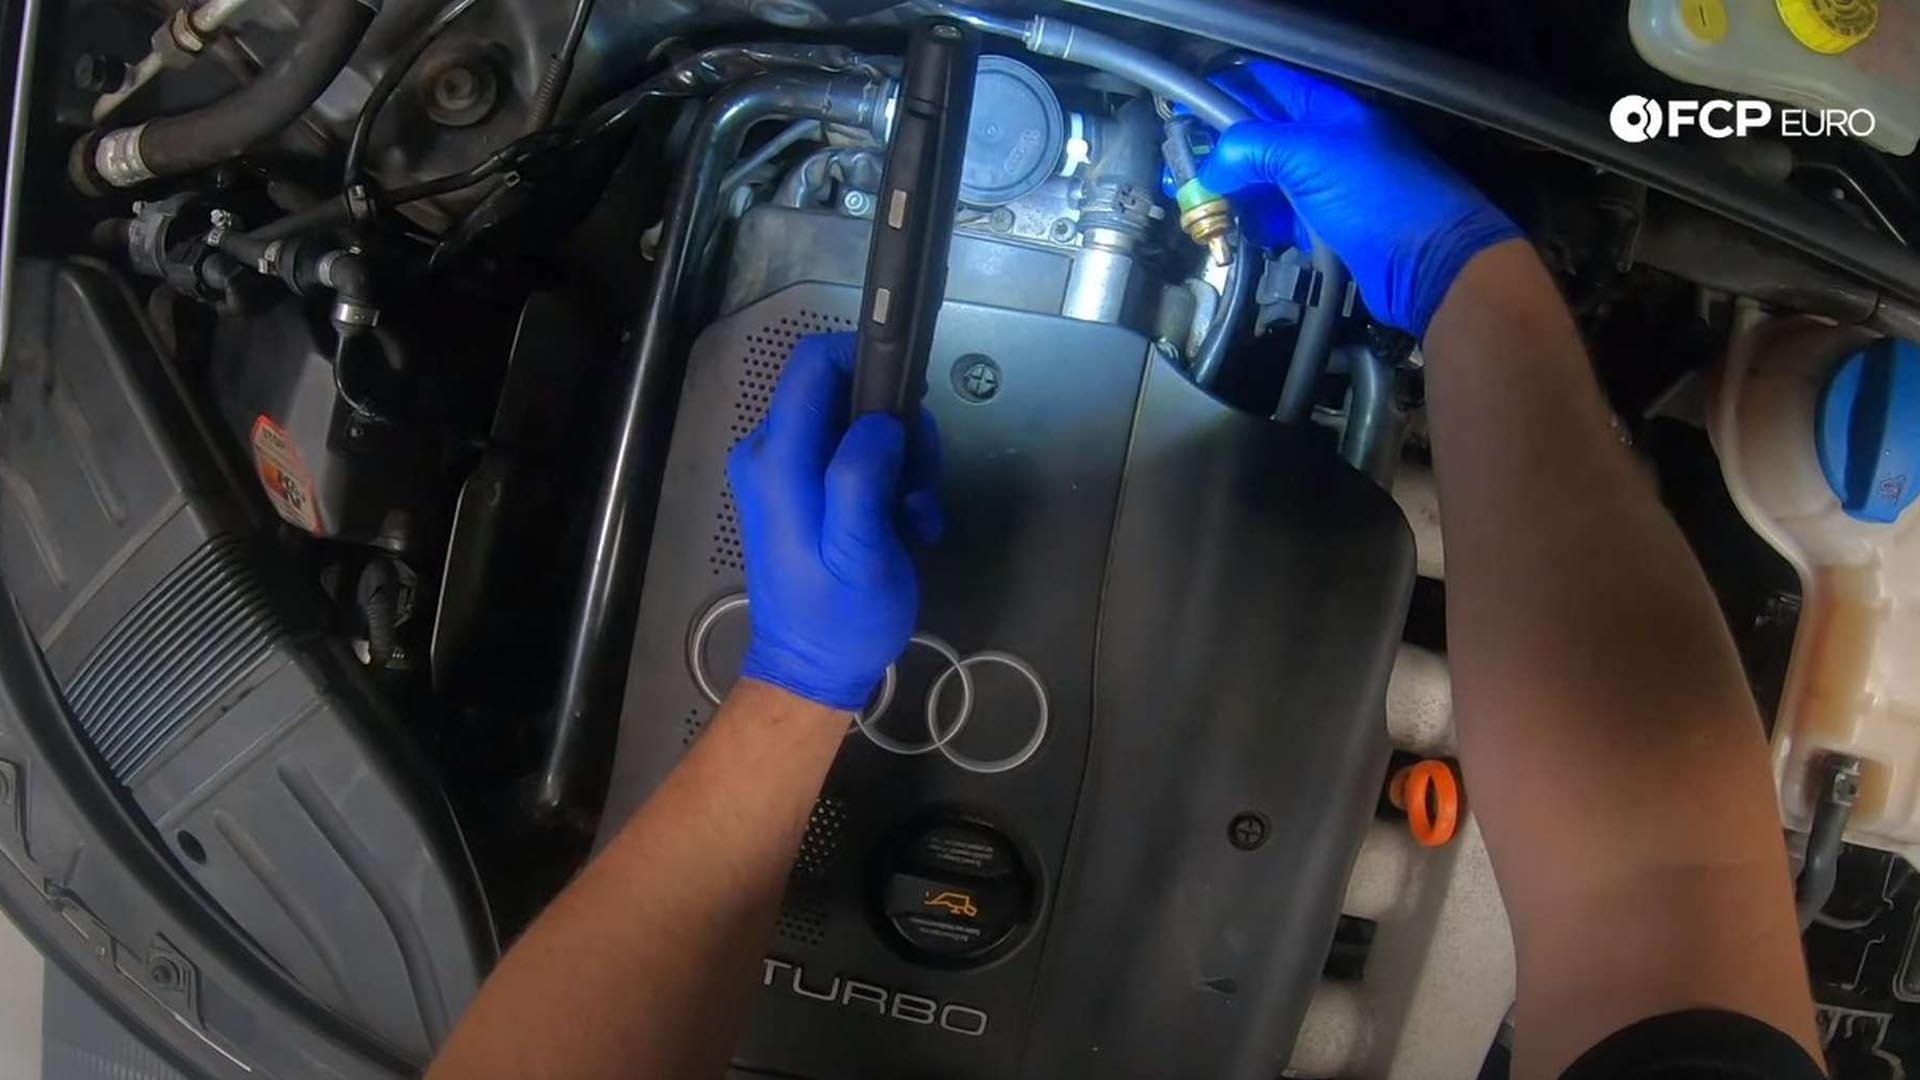 How To Replace The Coolant Temperature Sensor On An Audi/VW 1.8t (Audi A4, A6, Golf, Passat, & More)